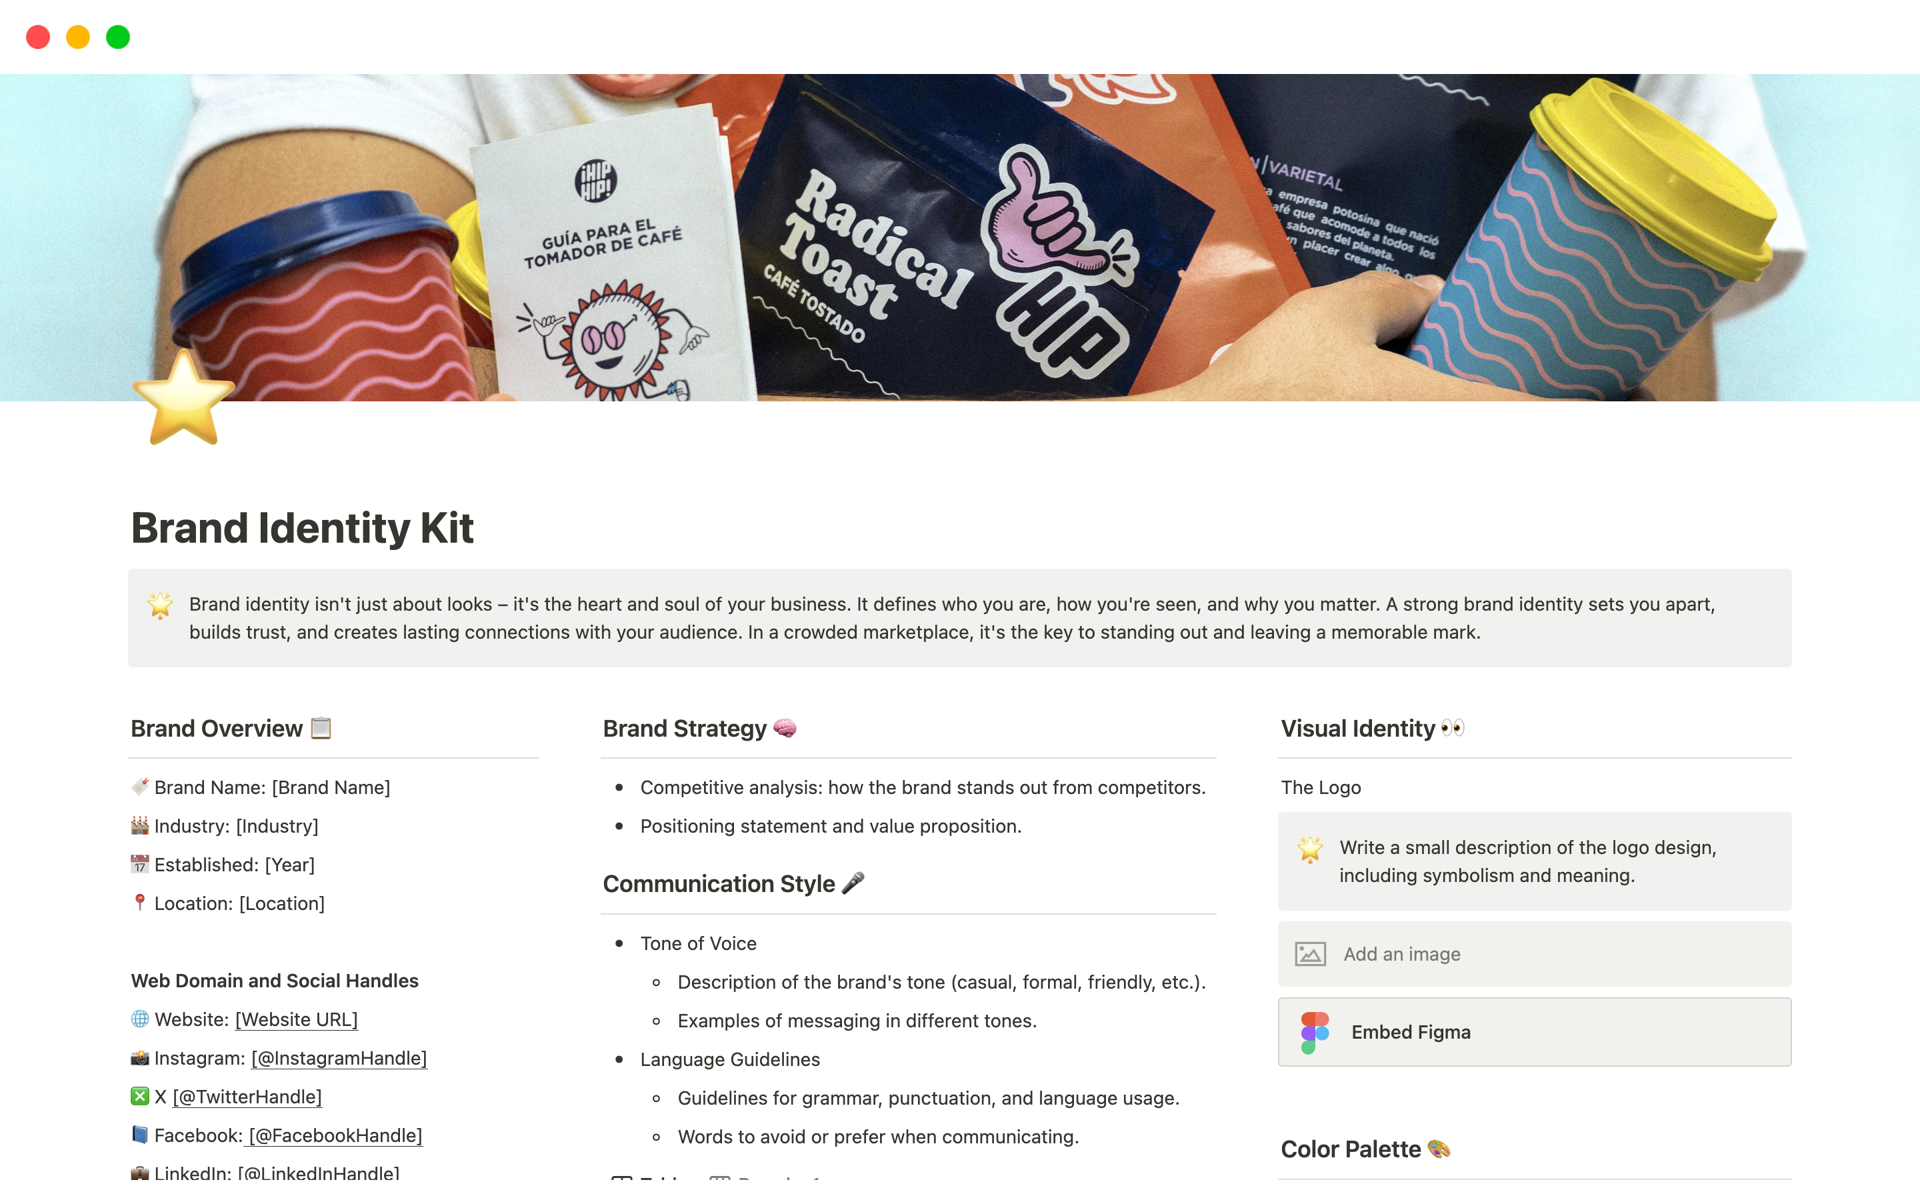 Unleash your brand's essence and redefine its identity with the Brand Identity Kit. 🚀